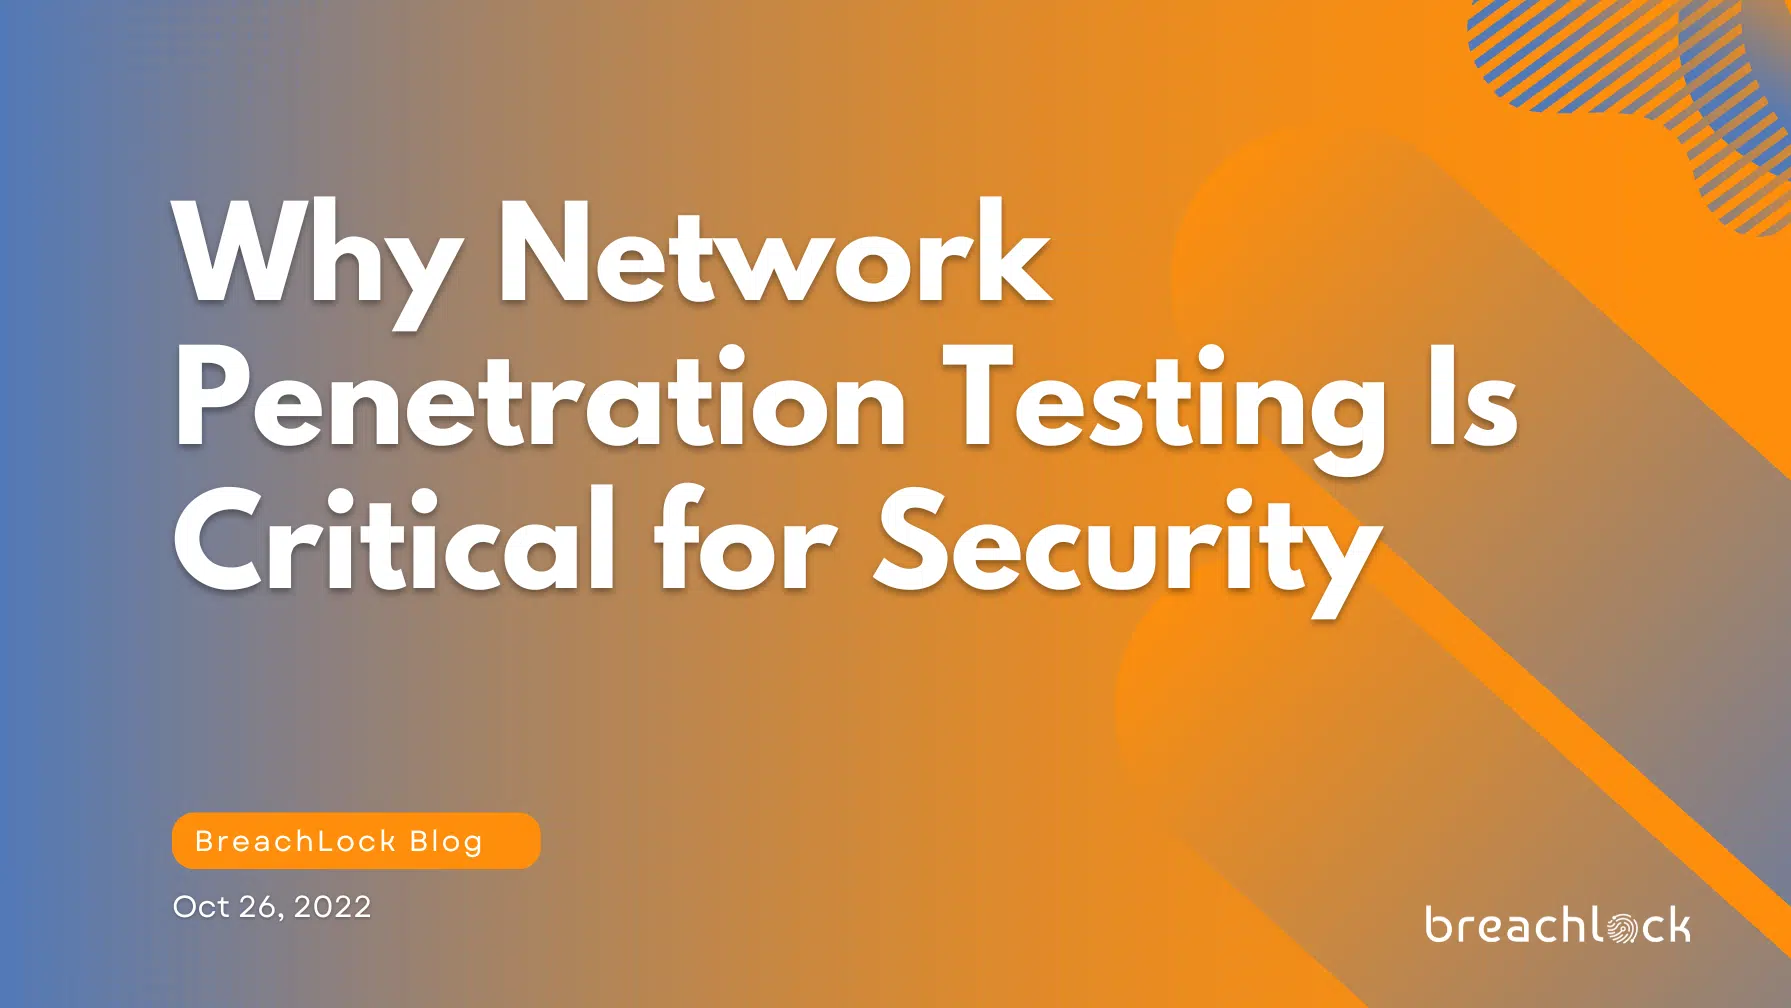 Why Network Penetration Testing Is Critical for Security